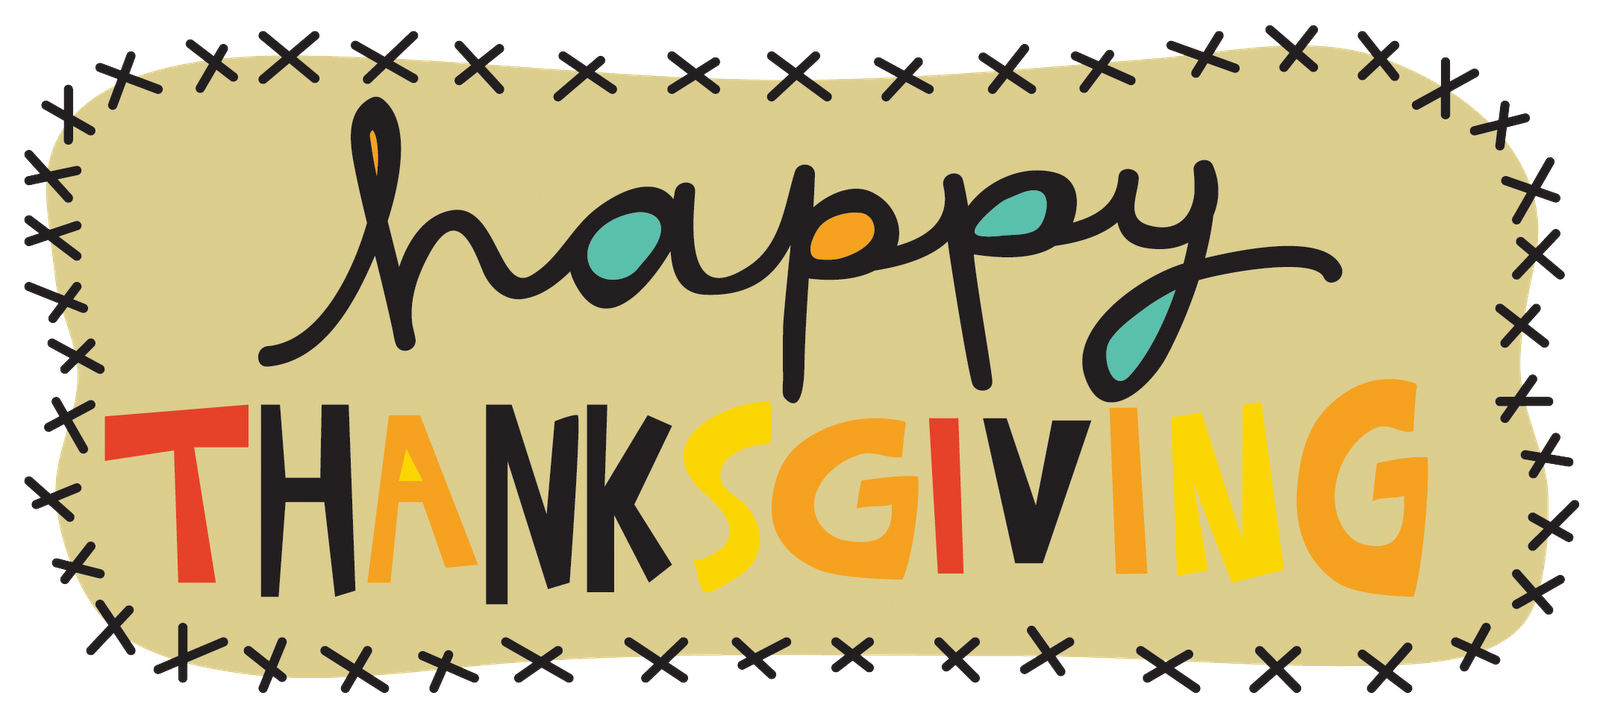 Happy clipart thanksgiving.  collection of in